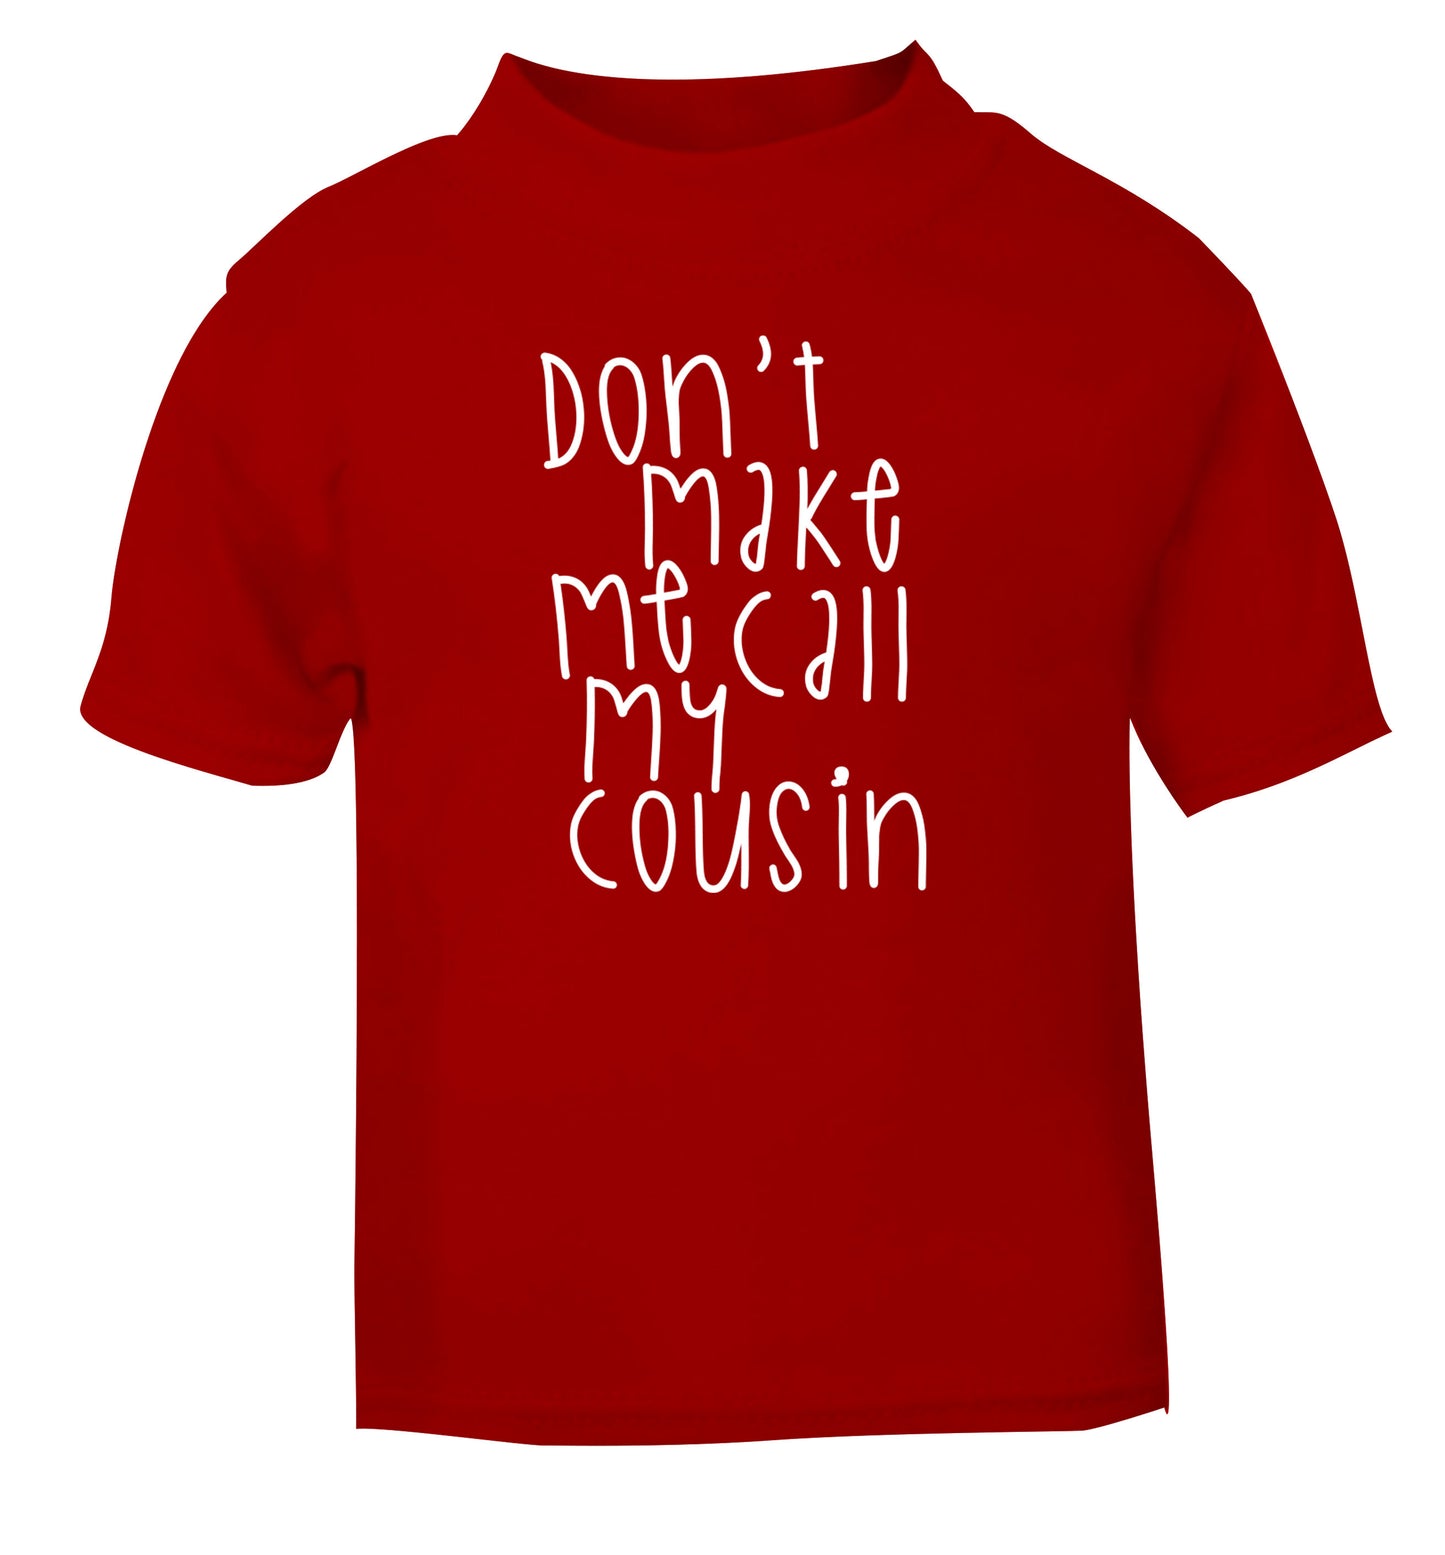 Don't make me call my cousin red Baby Toddler Tshirt 2 Years